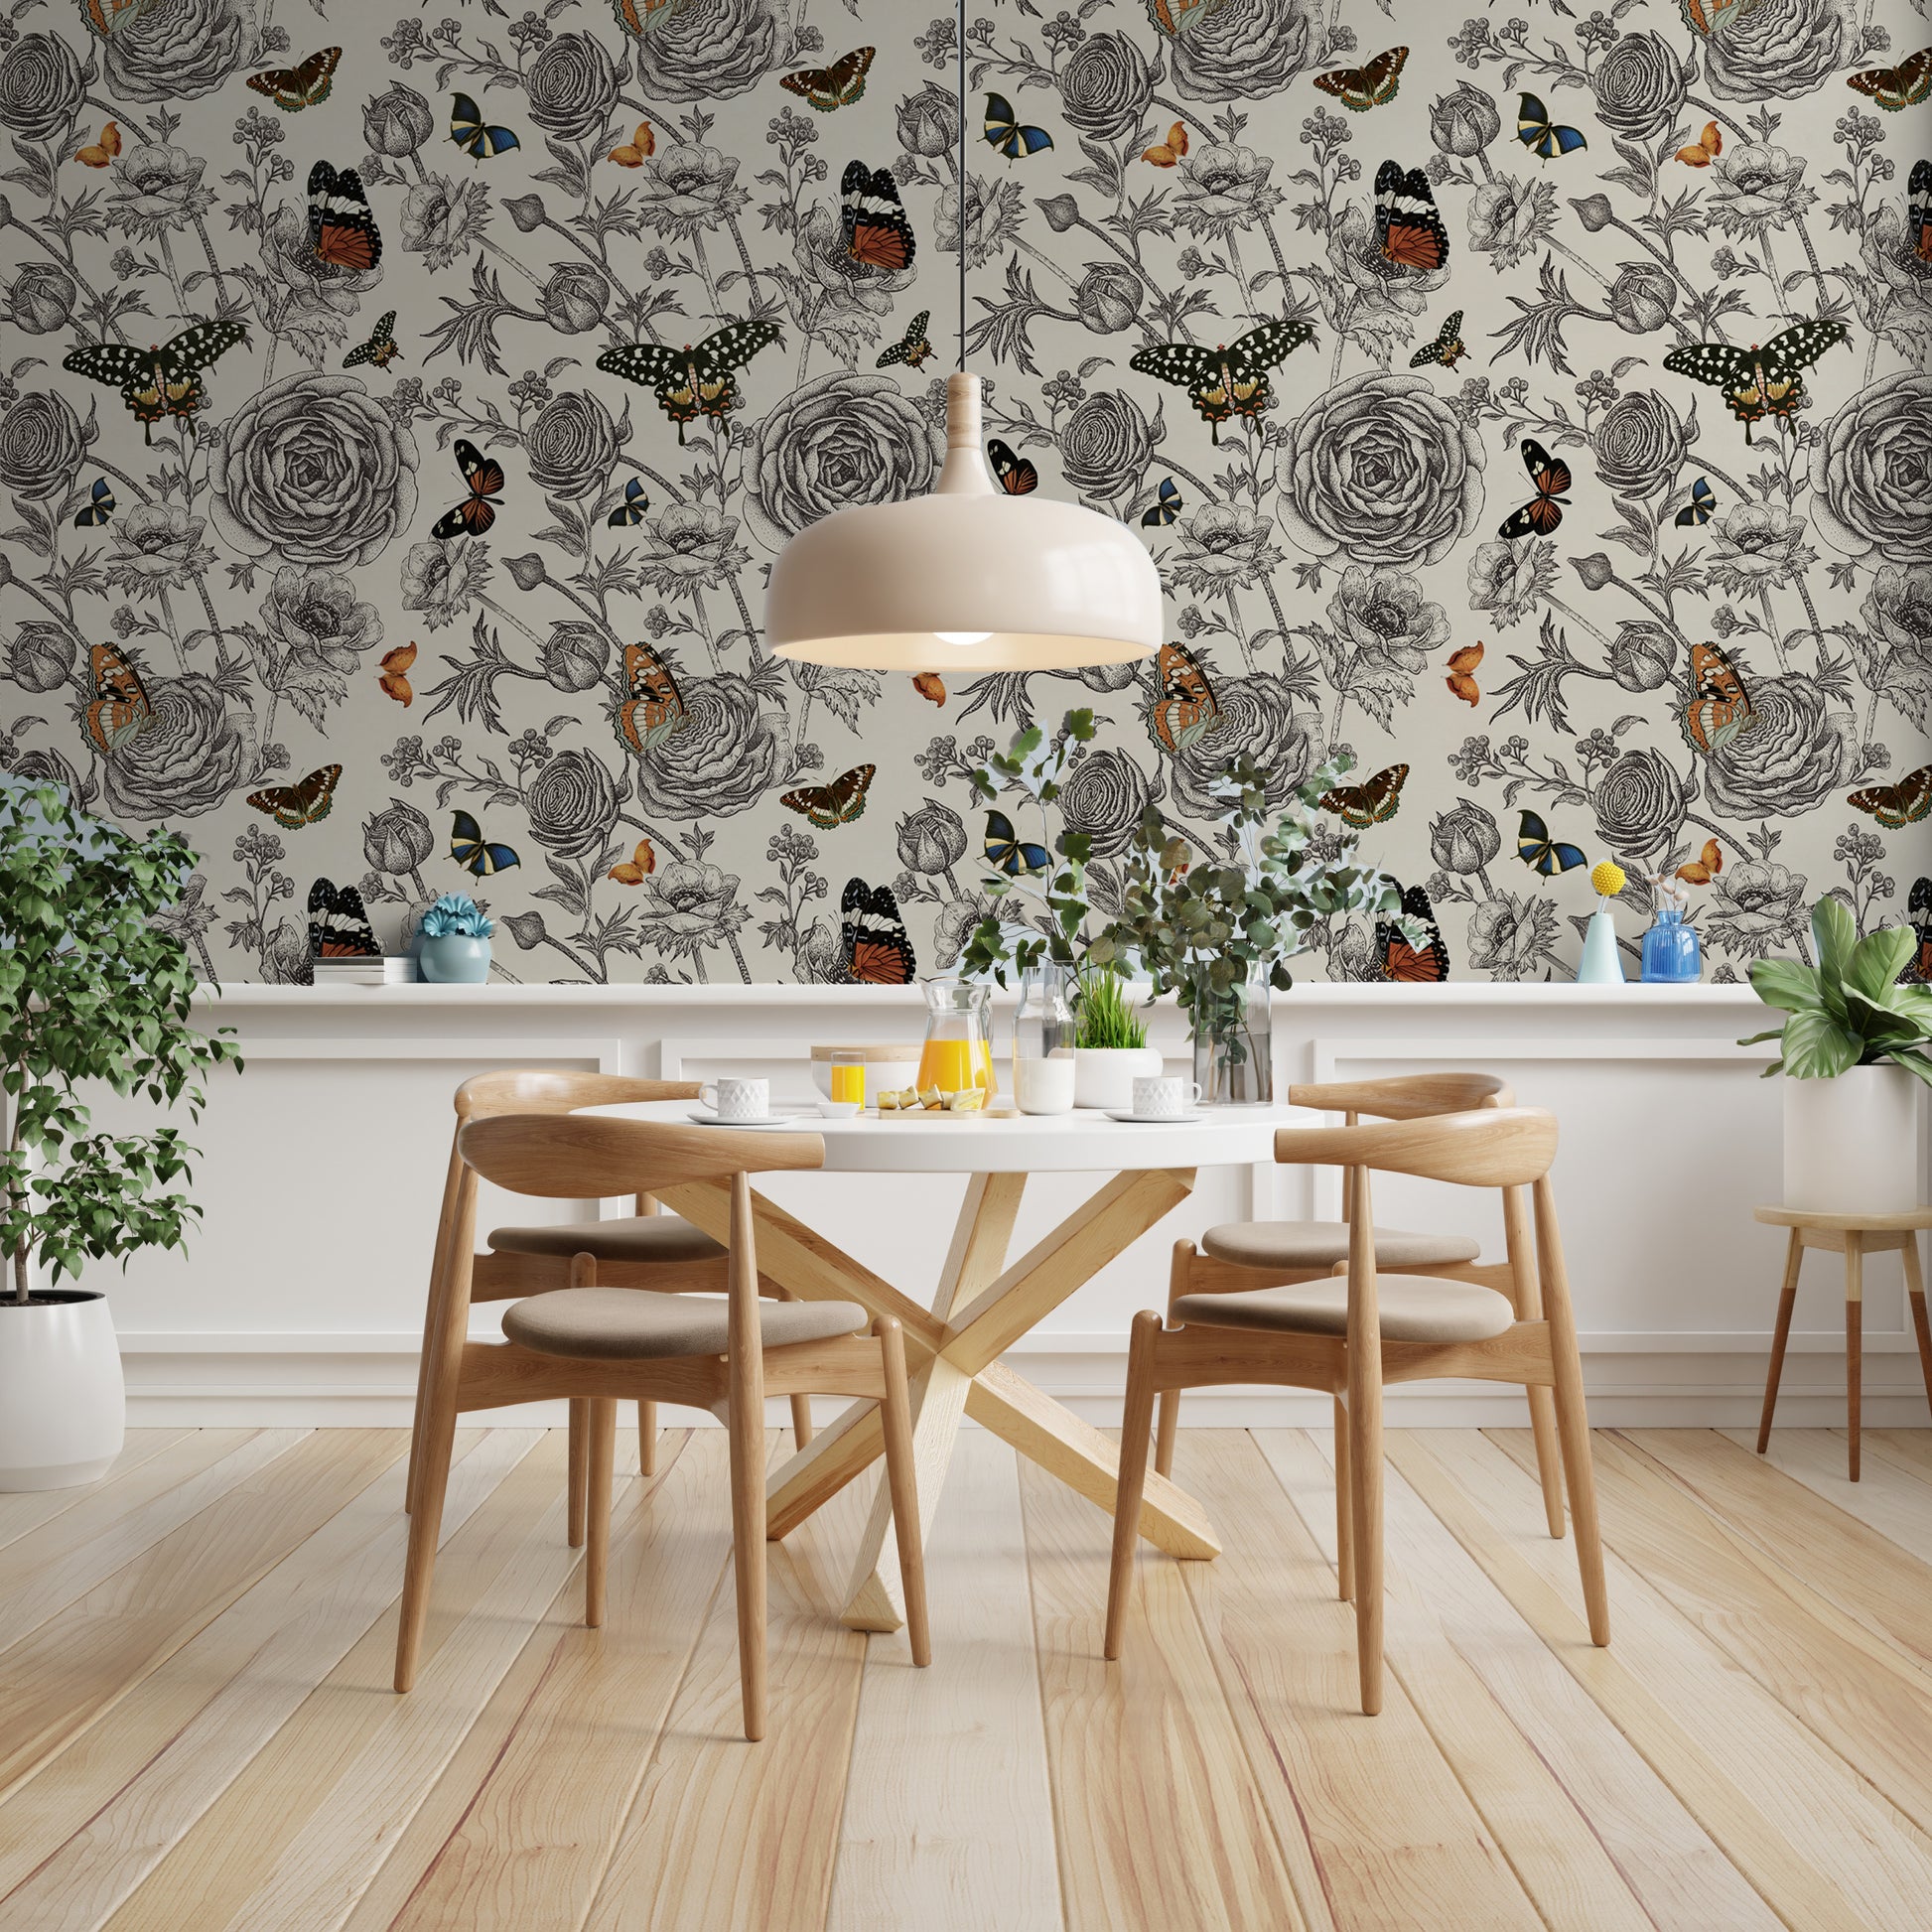 Black and white butterfly wallpaper shown in a dining room